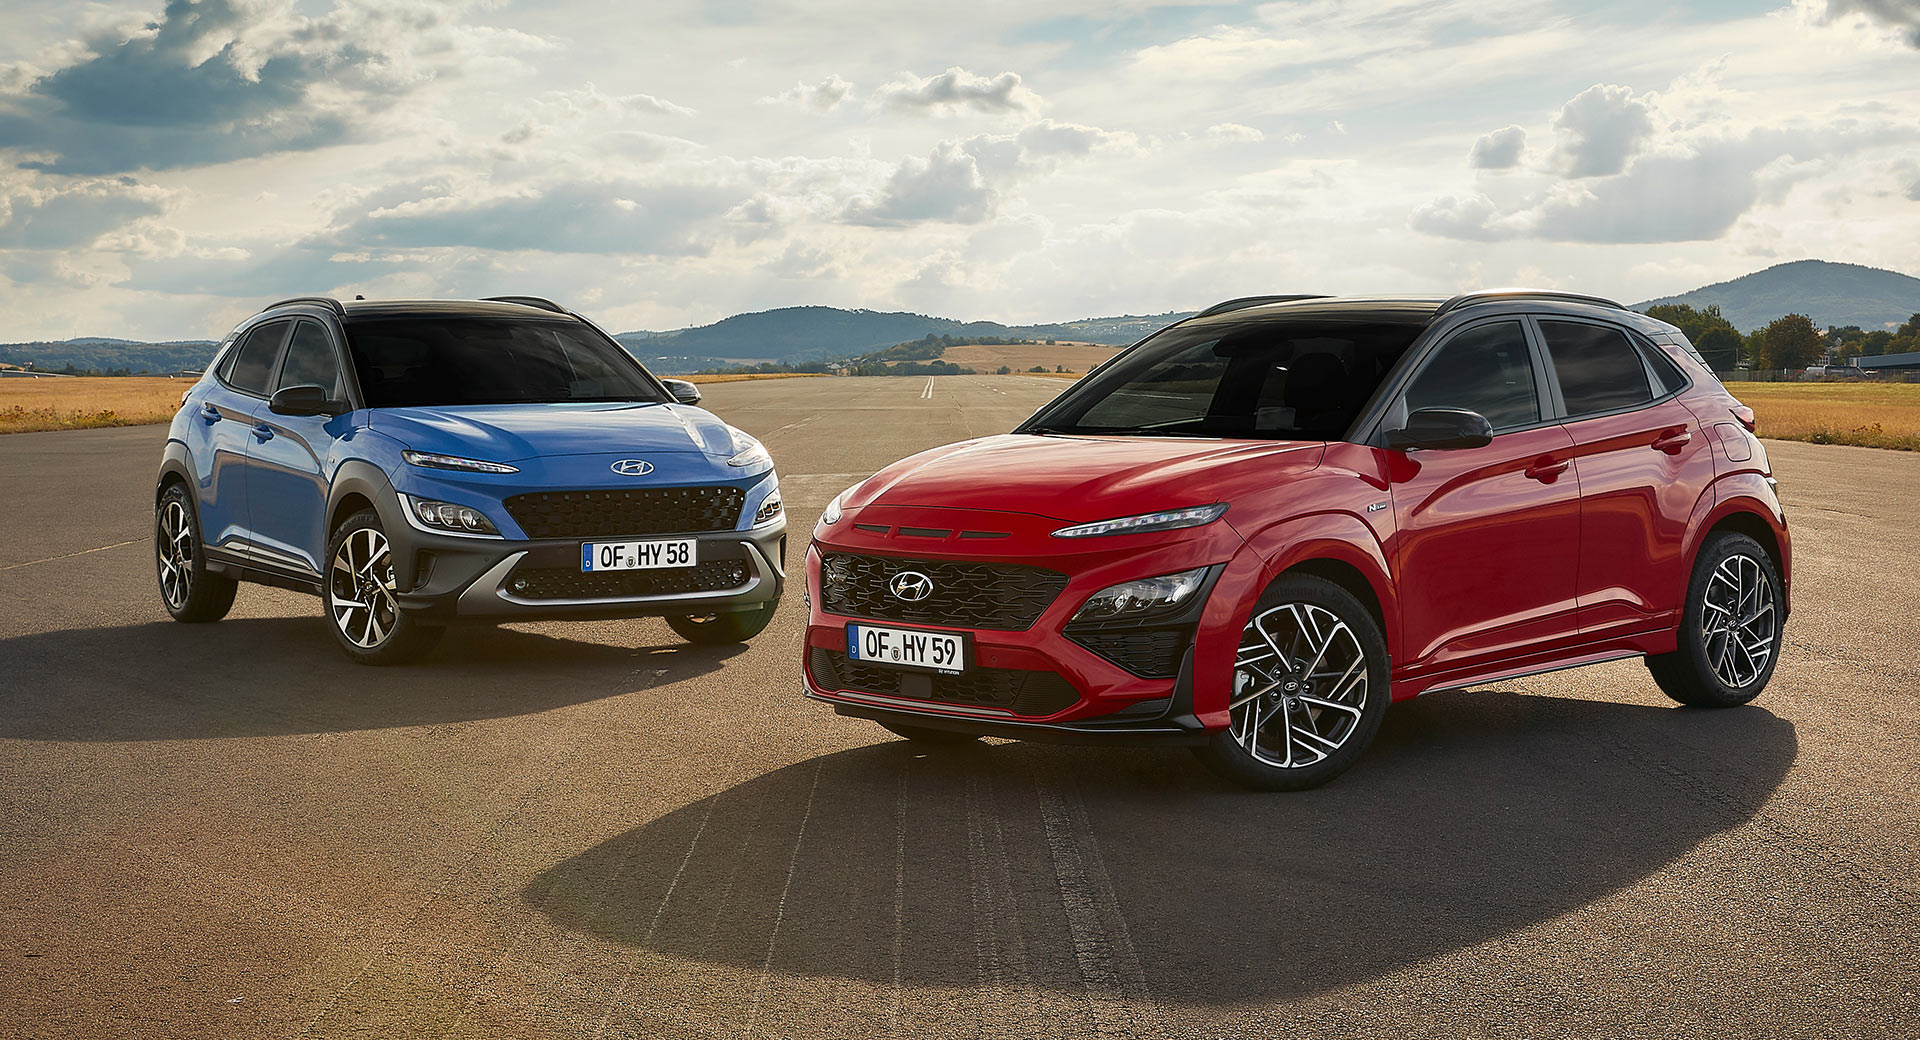 2021 Hyundai Kona Arrives With Tweaked Looks And An N Line Variant |  Carscoops